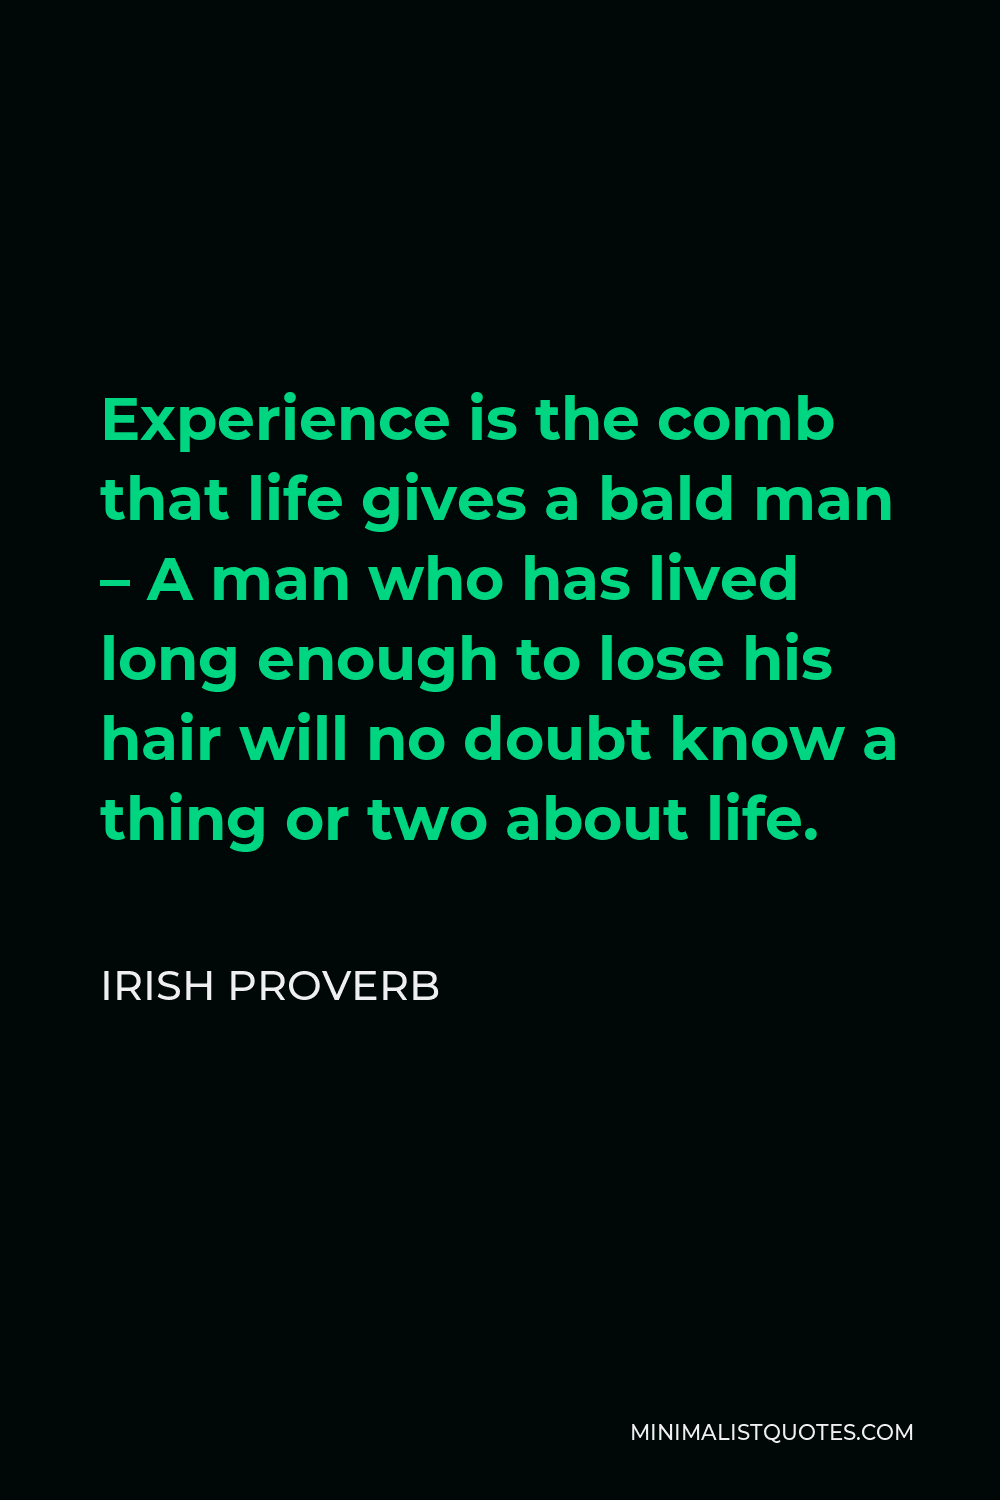 Irish Proverb Quote - Experience is the comb that life gives a bald man – A man who has lived long enough to lose his hair will no doubt know a thing or two about life.